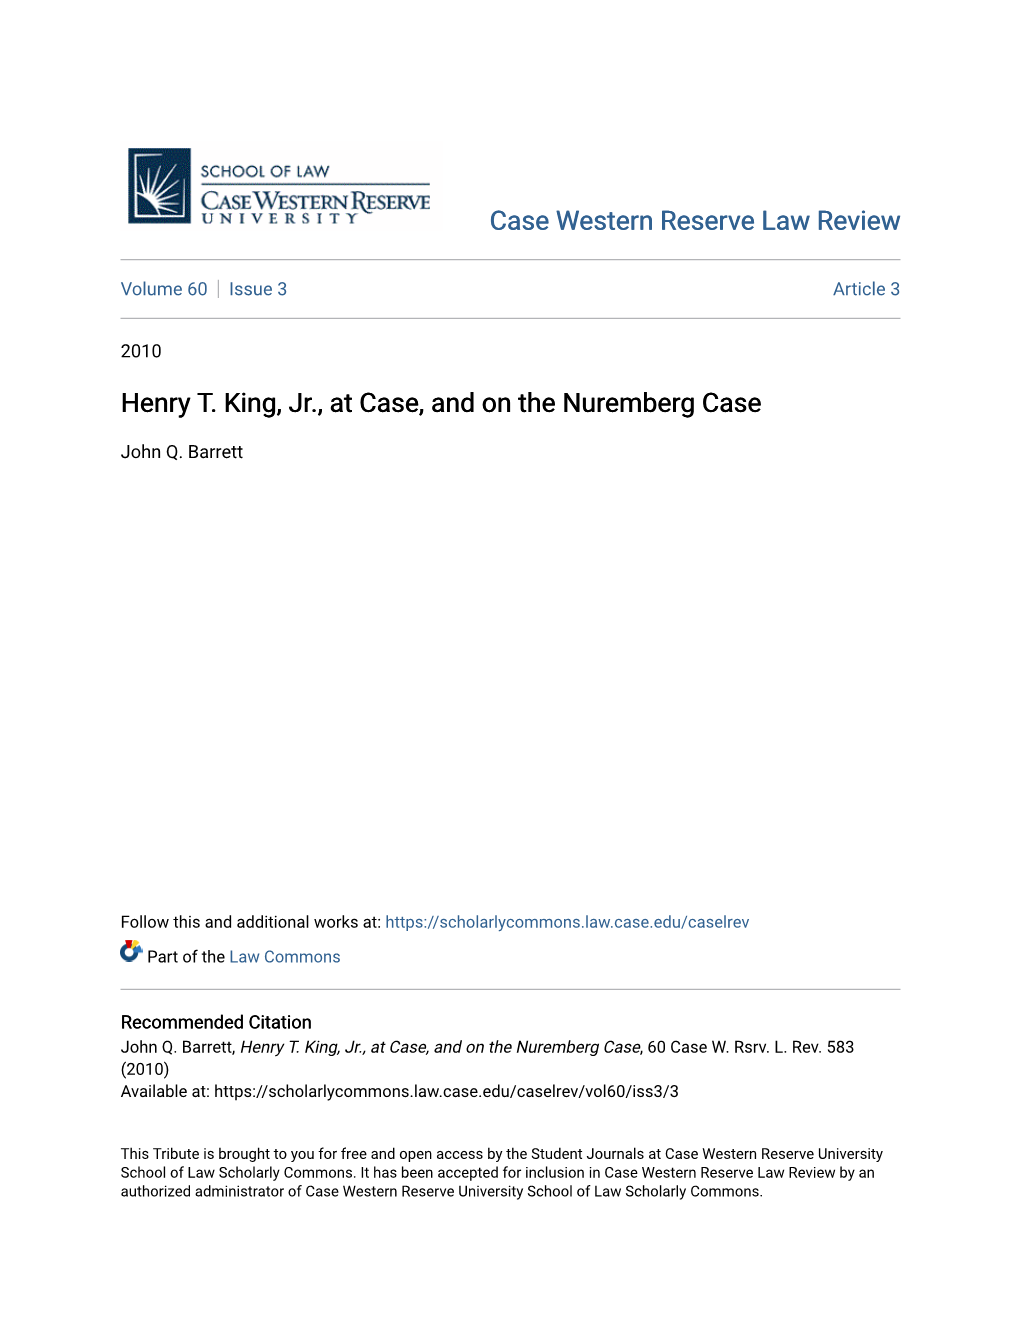 Henry T. King, Jr., at Case, and on the Nuremberg Case